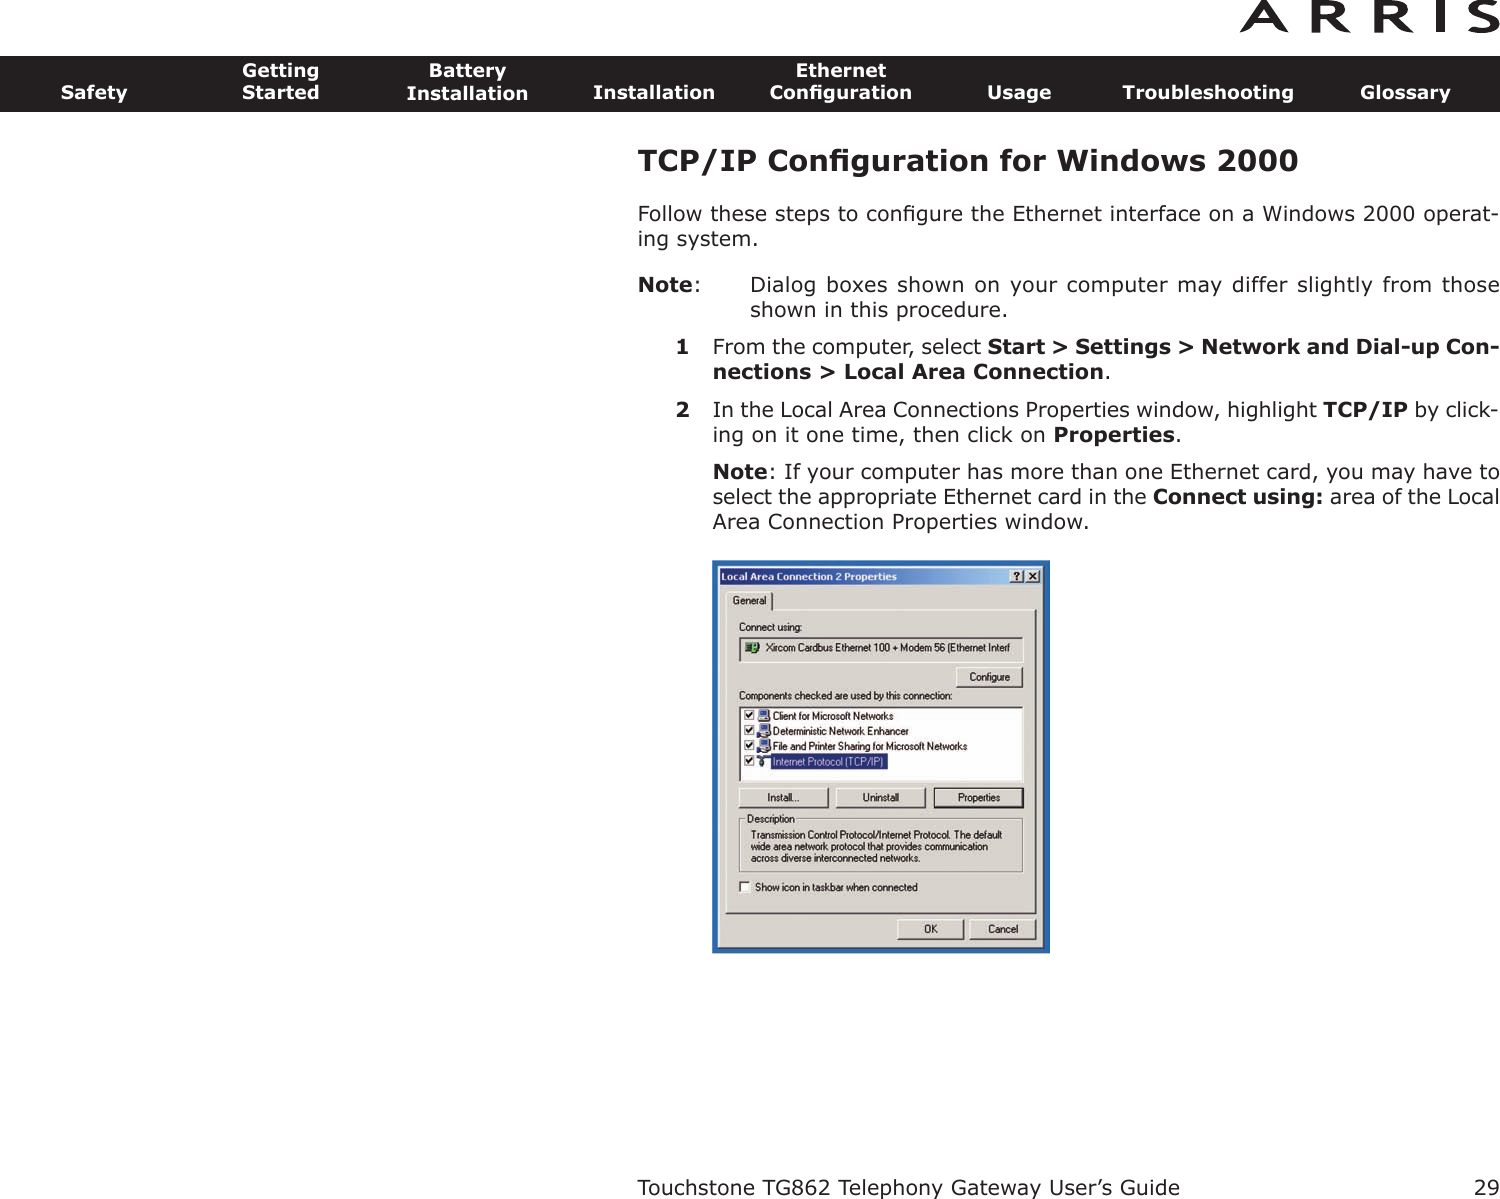 TCP/IP Conﬁguration for Windows 2000Follow these steps to conﬁgure the Ethernet interface on a Windows 2000 operat-ing system.Note: Dialog boxes shown on your computer may differ slightly from thoseshown in this procedure.1From the computer, select Start &gt; Settings &gt; Network and Dial-up Con-nections &gt; Local Area Connection.2In the Local Area Connections Properties window, highlight TCP/IP by click-ing on it one time, then click on Properties.Note: If your computer has more than one Ethernet card, you may have toselect the appropriate Ethernet card in the Connect using: area of the LocalArea Connection Properties window.Touchstone TG862 Telephony Gateway User’s GuideSafetyGettingStartedBatteryInstallation InstallationEthernetConﬁguration Usage Troubleshooting Glossary29